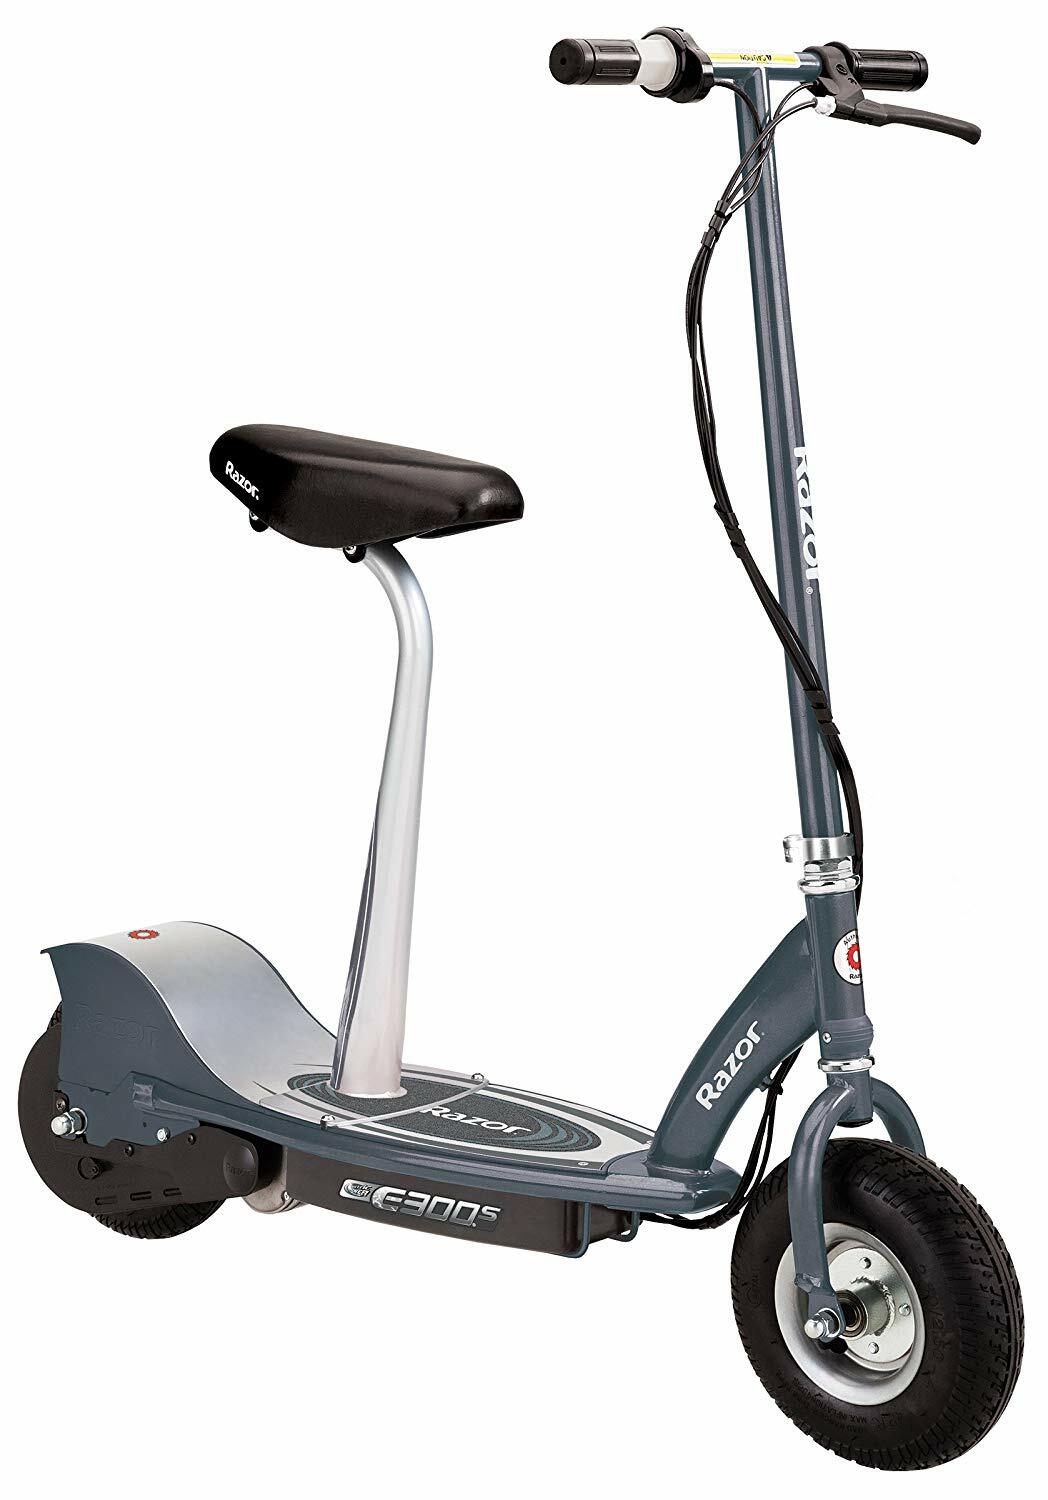 RAZOR Scooter Electric E300 Seated / 13173815 / Grey